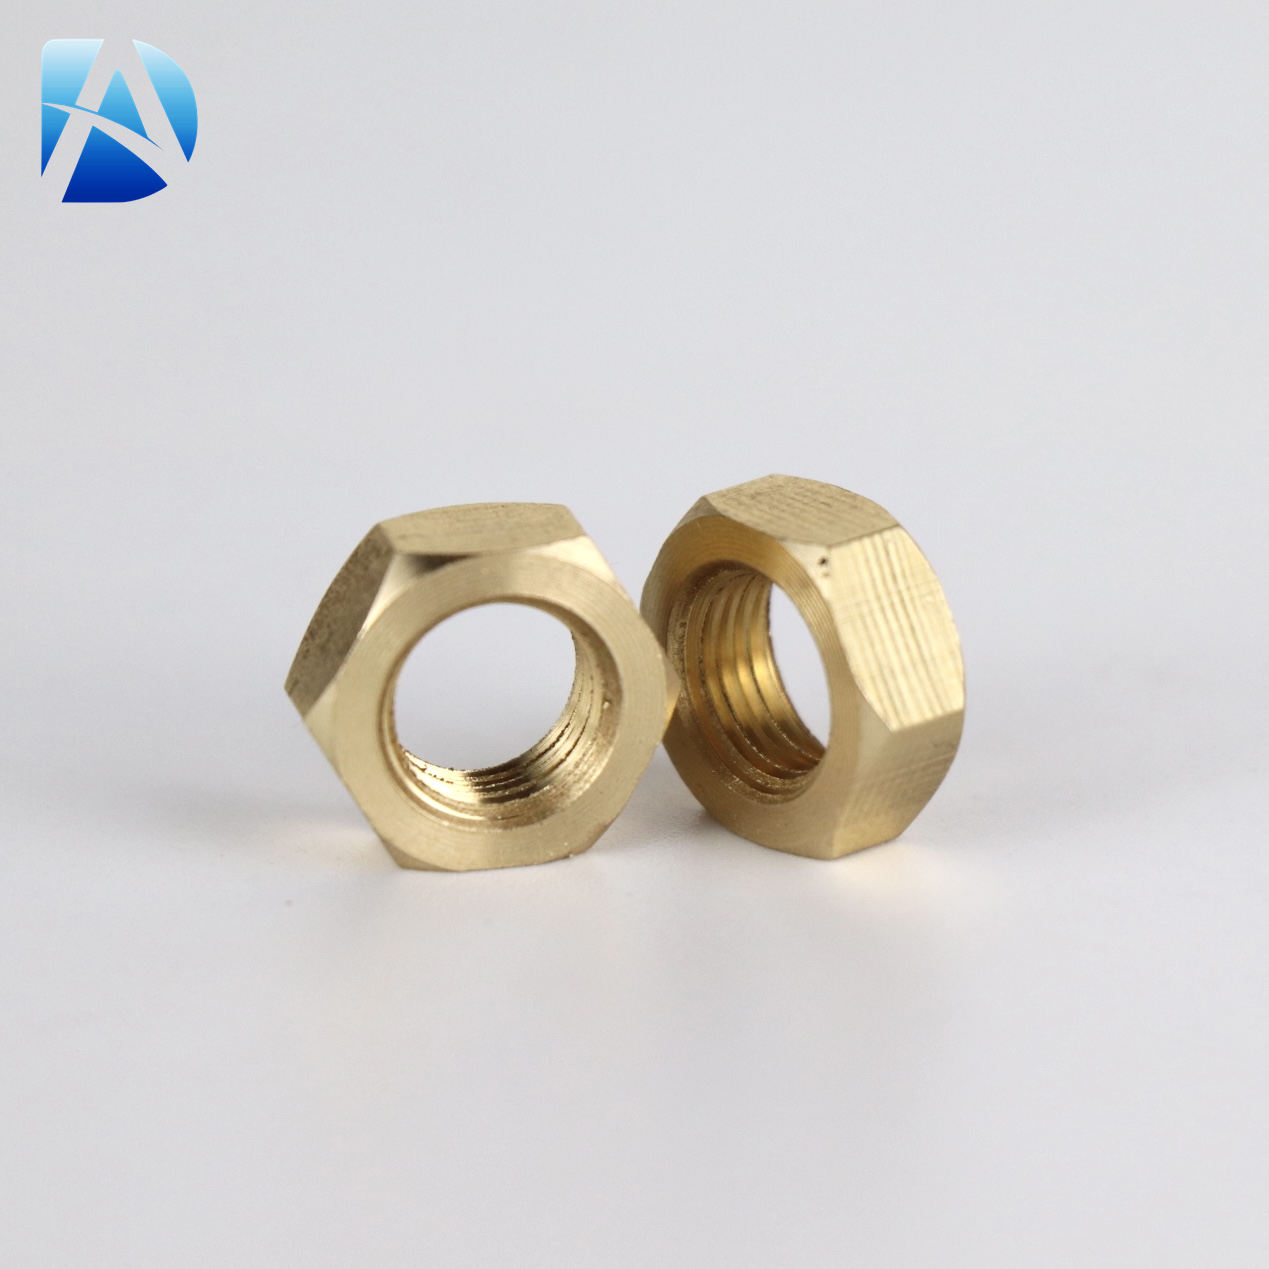 The Characteristics of A Brass Hex Nut